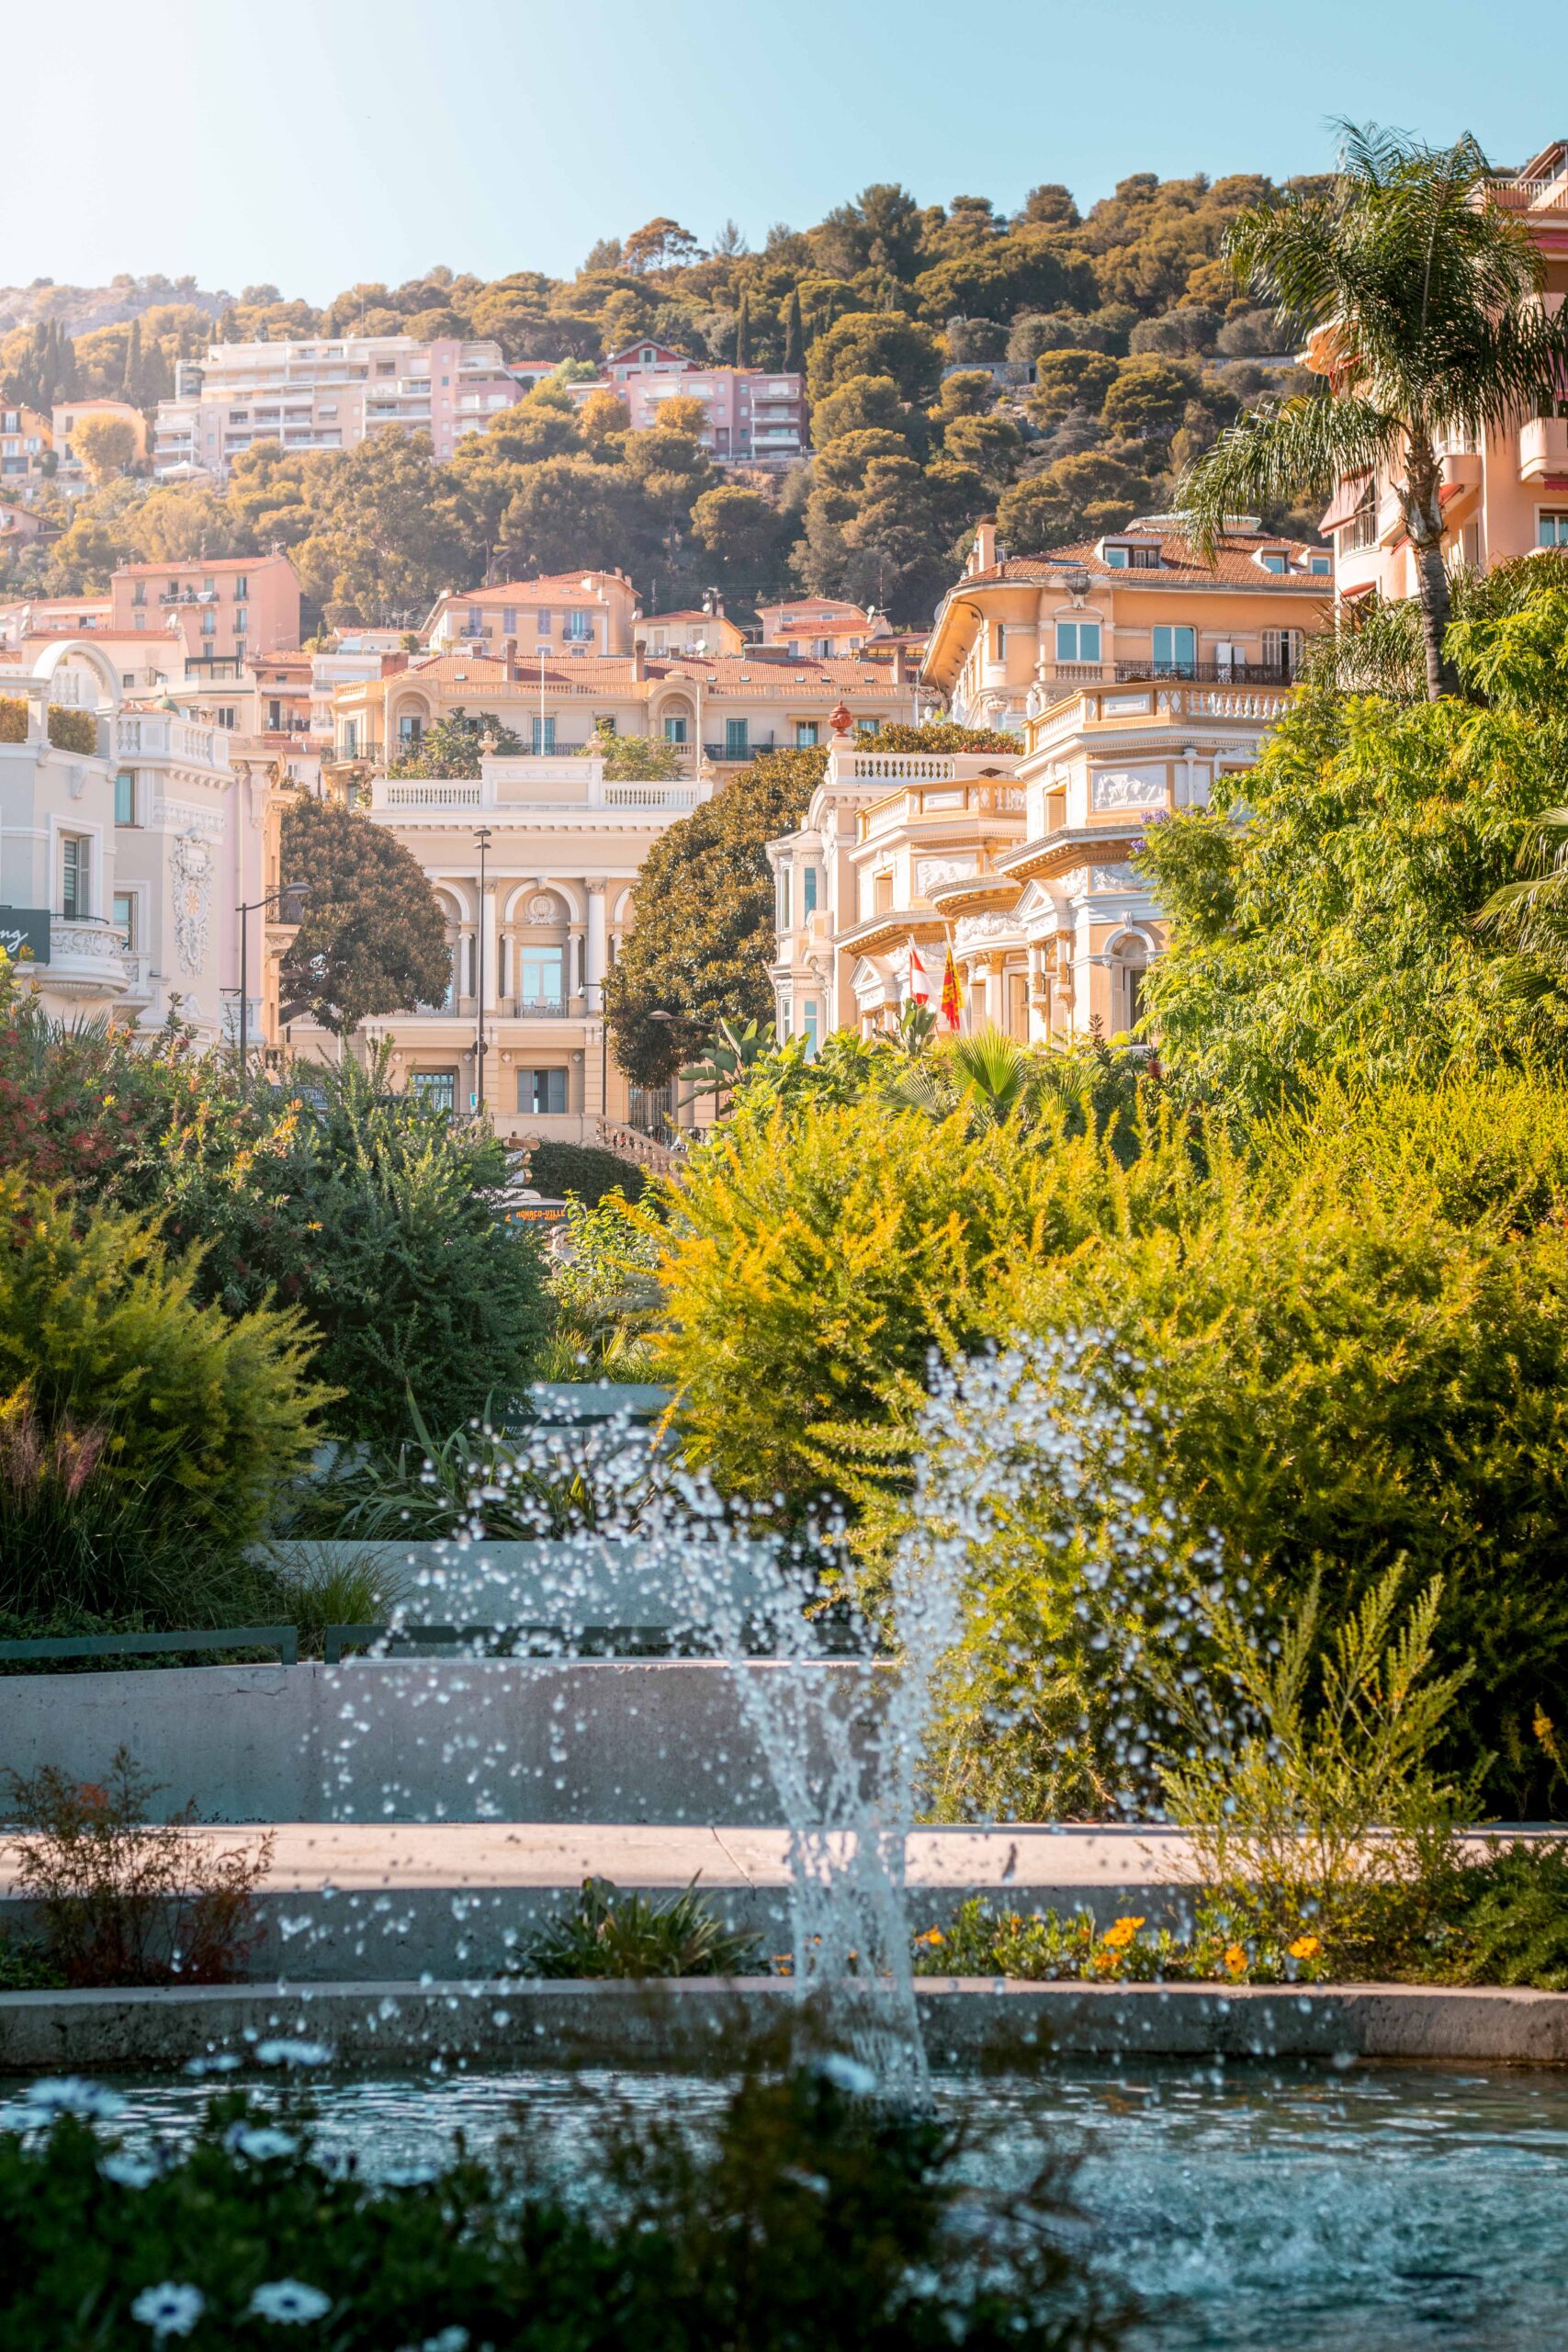 Fountains and terraced gardens from the Casino Garden during a sunny day in Monaco